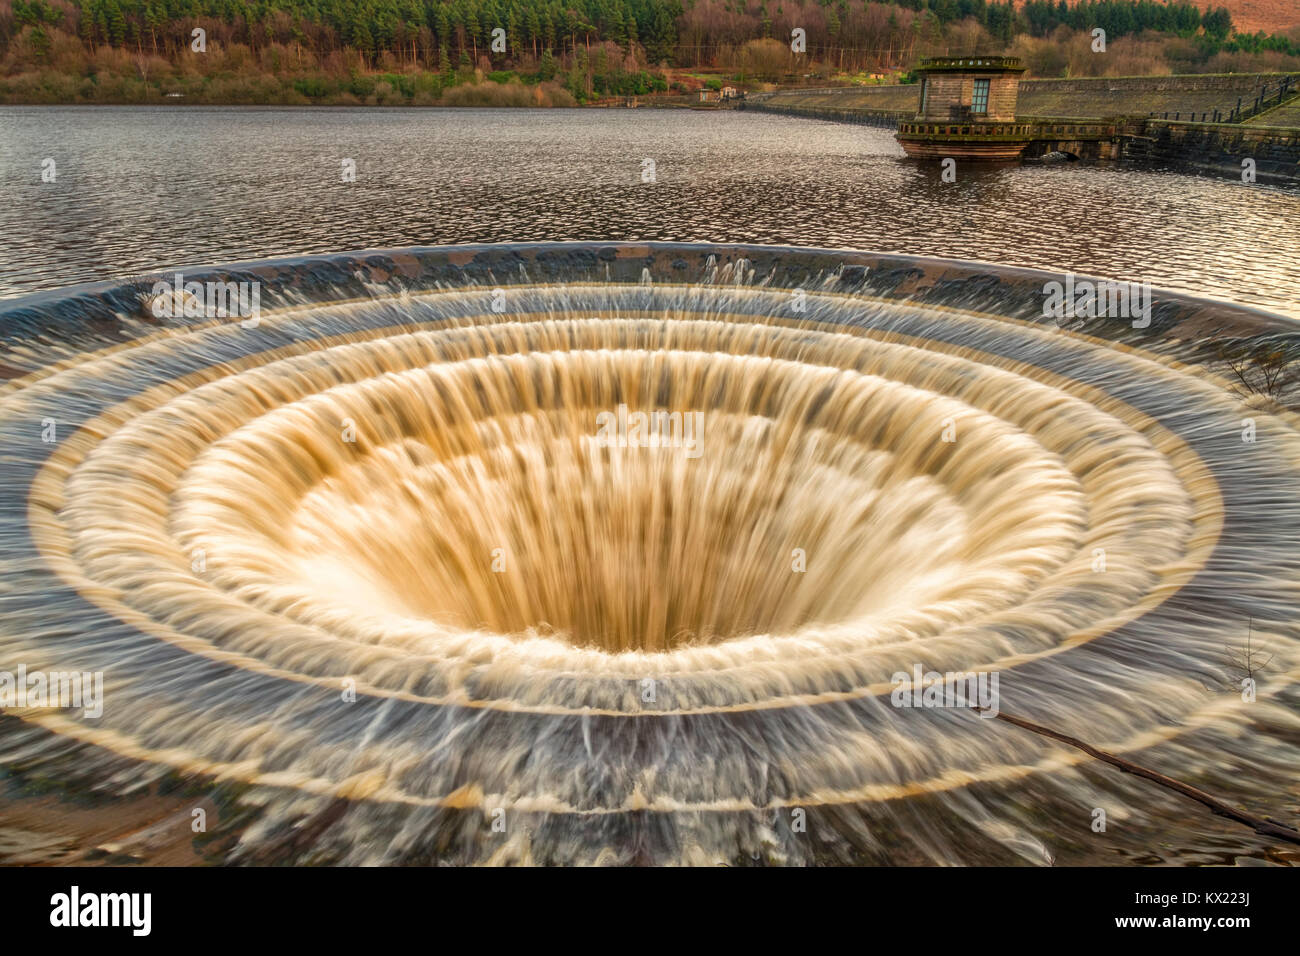 A closeup image of one of the plugholes at Ladybower Reservoir, Derbyshire Stock Photo